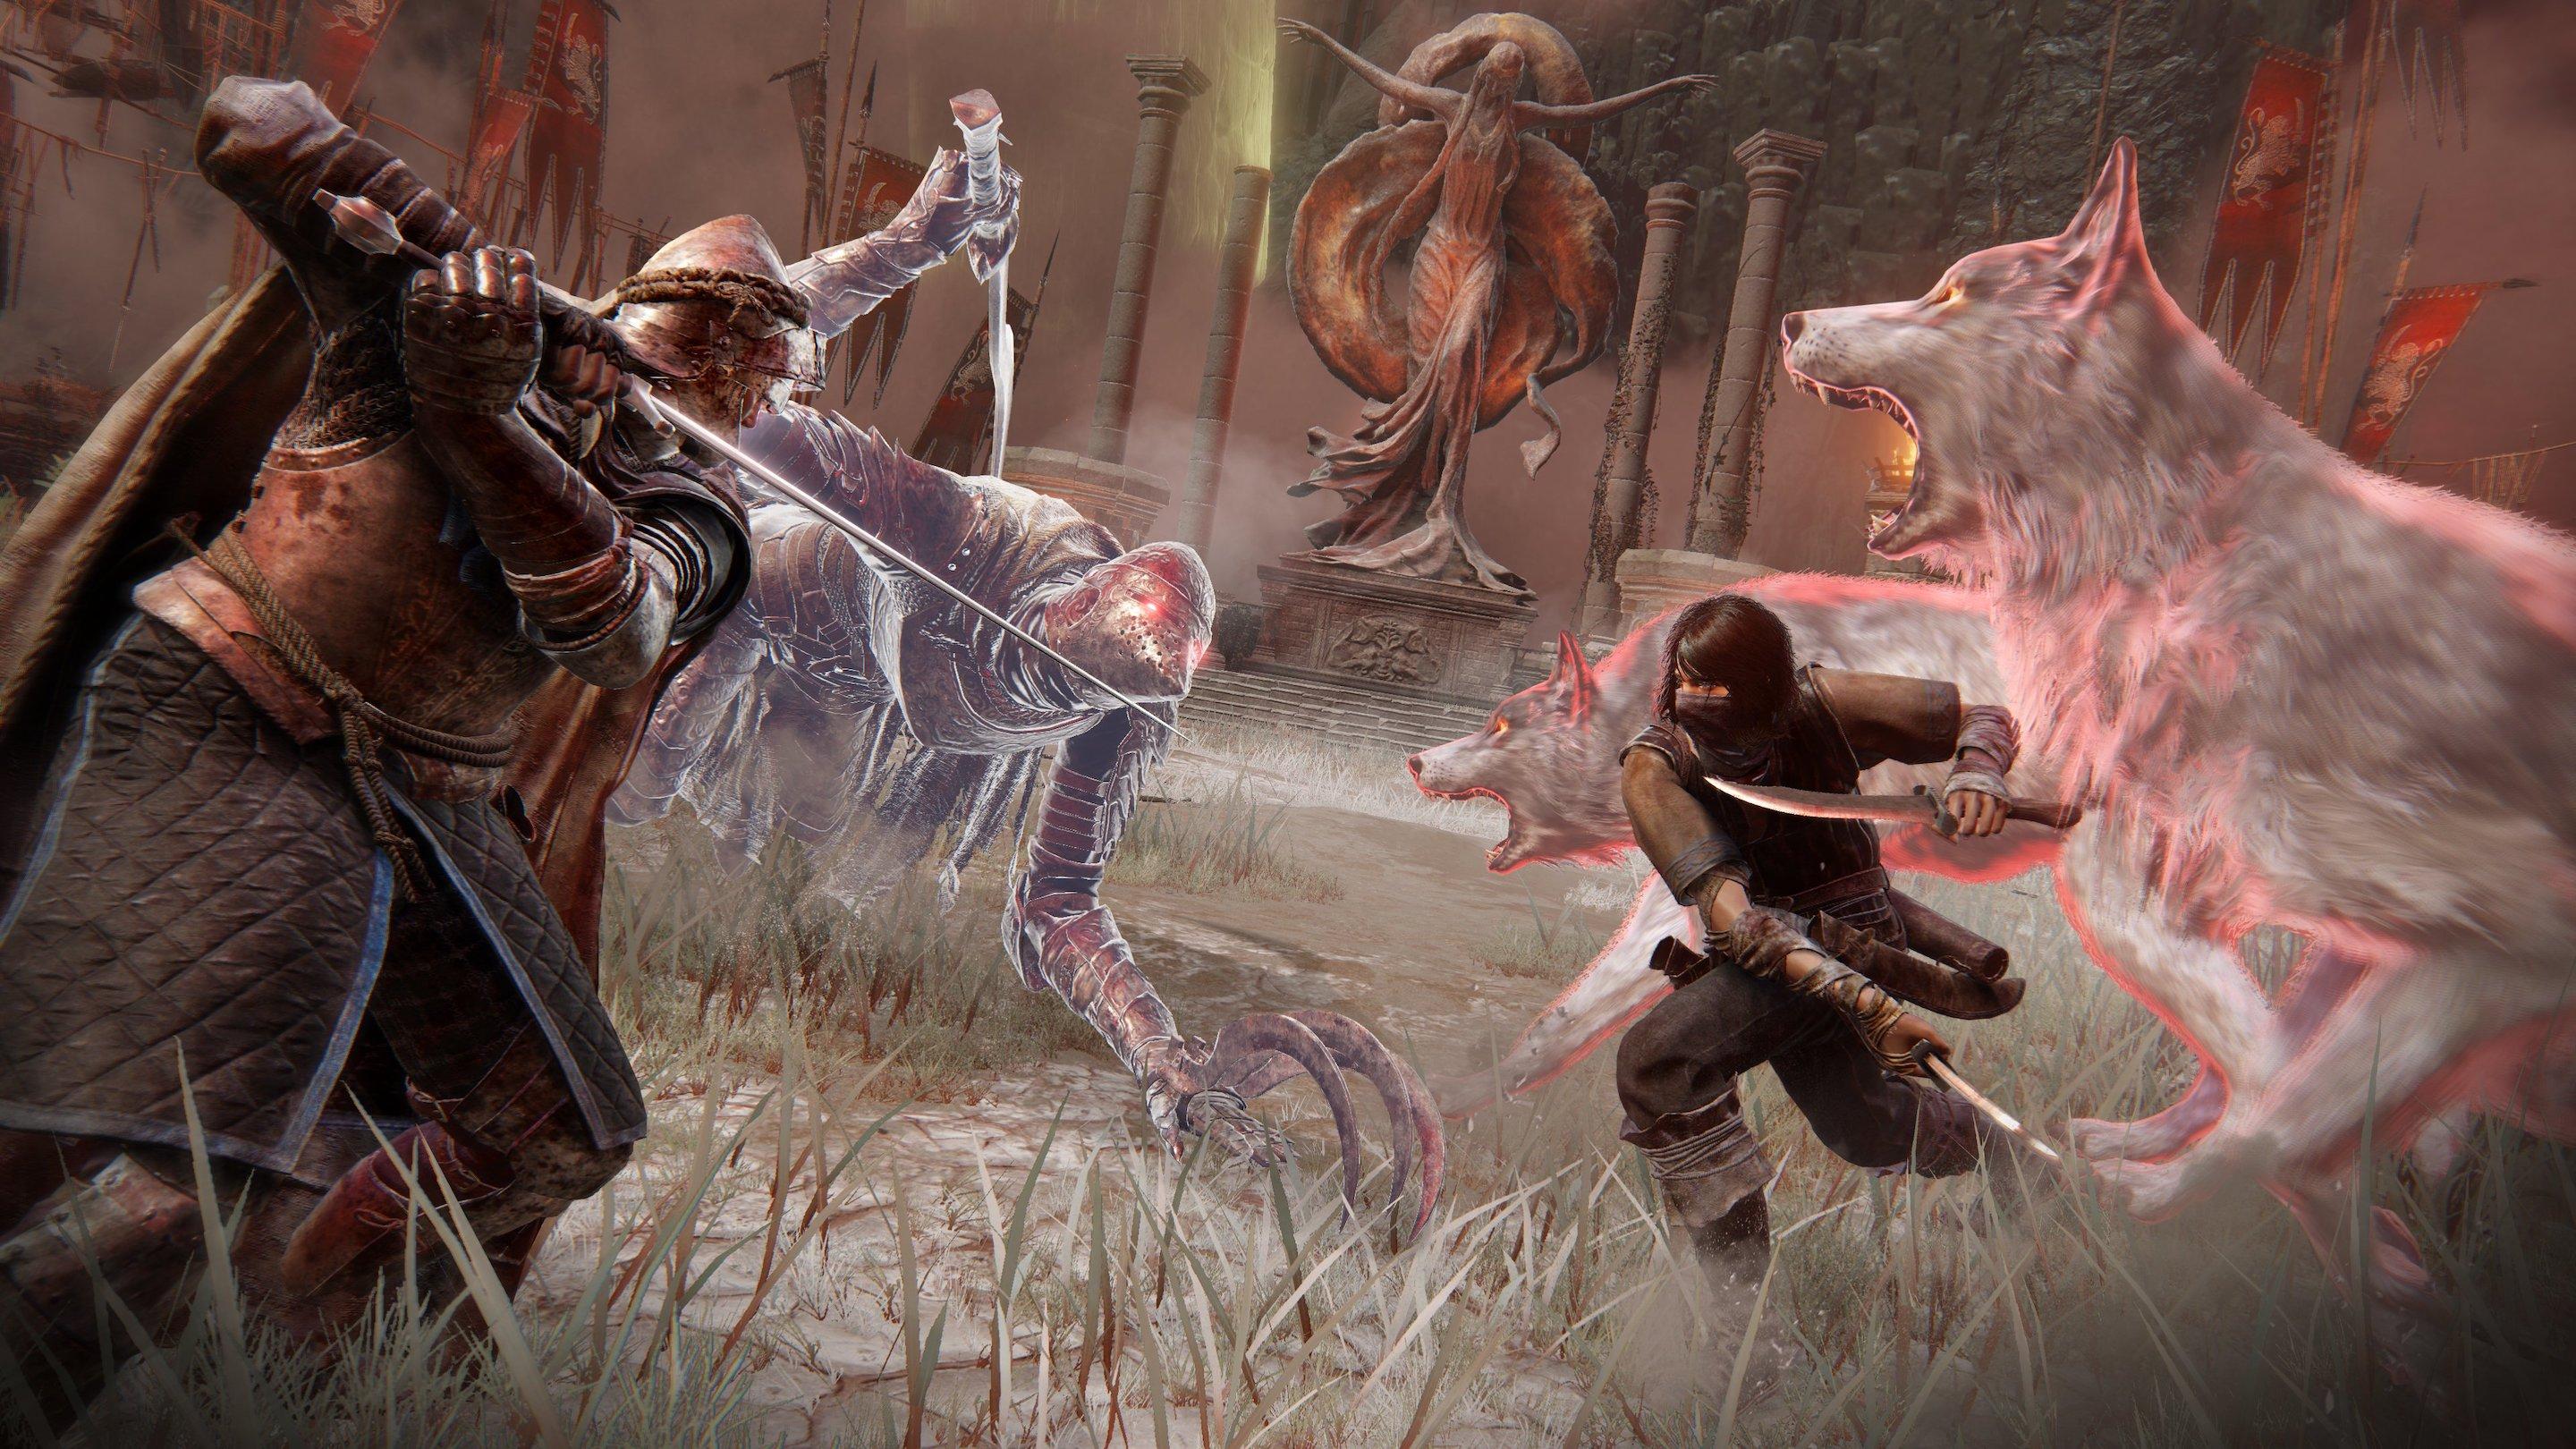 'Elden Ring' characters battling in the Colosseum